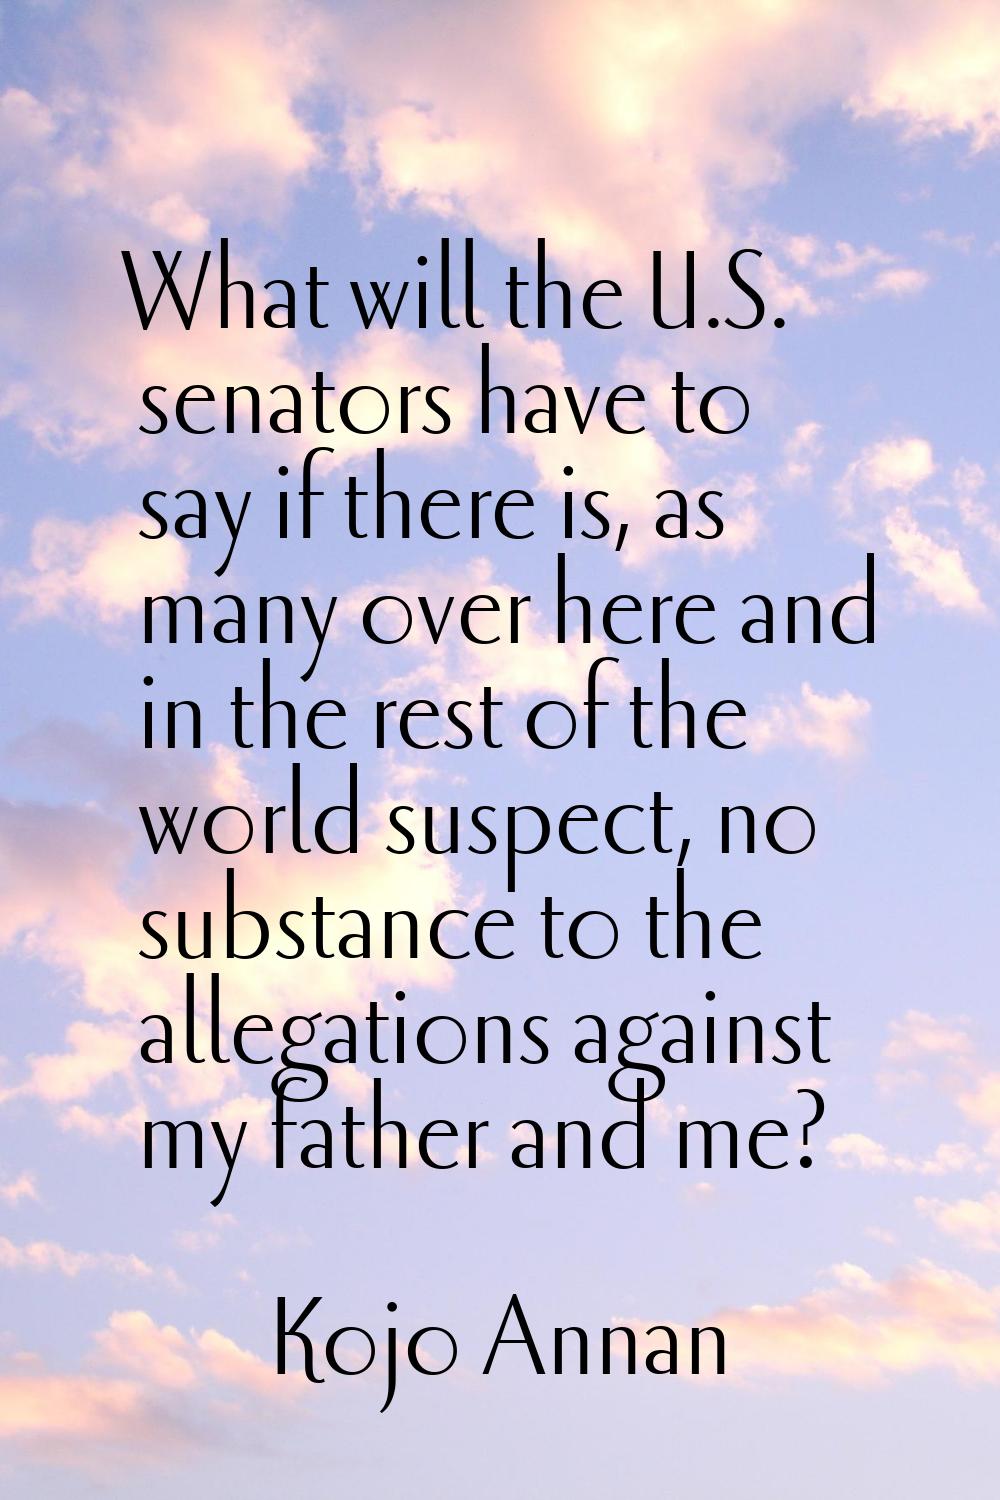 What will the U.S. senators have to say if there is, as many over here and in the rest of the world